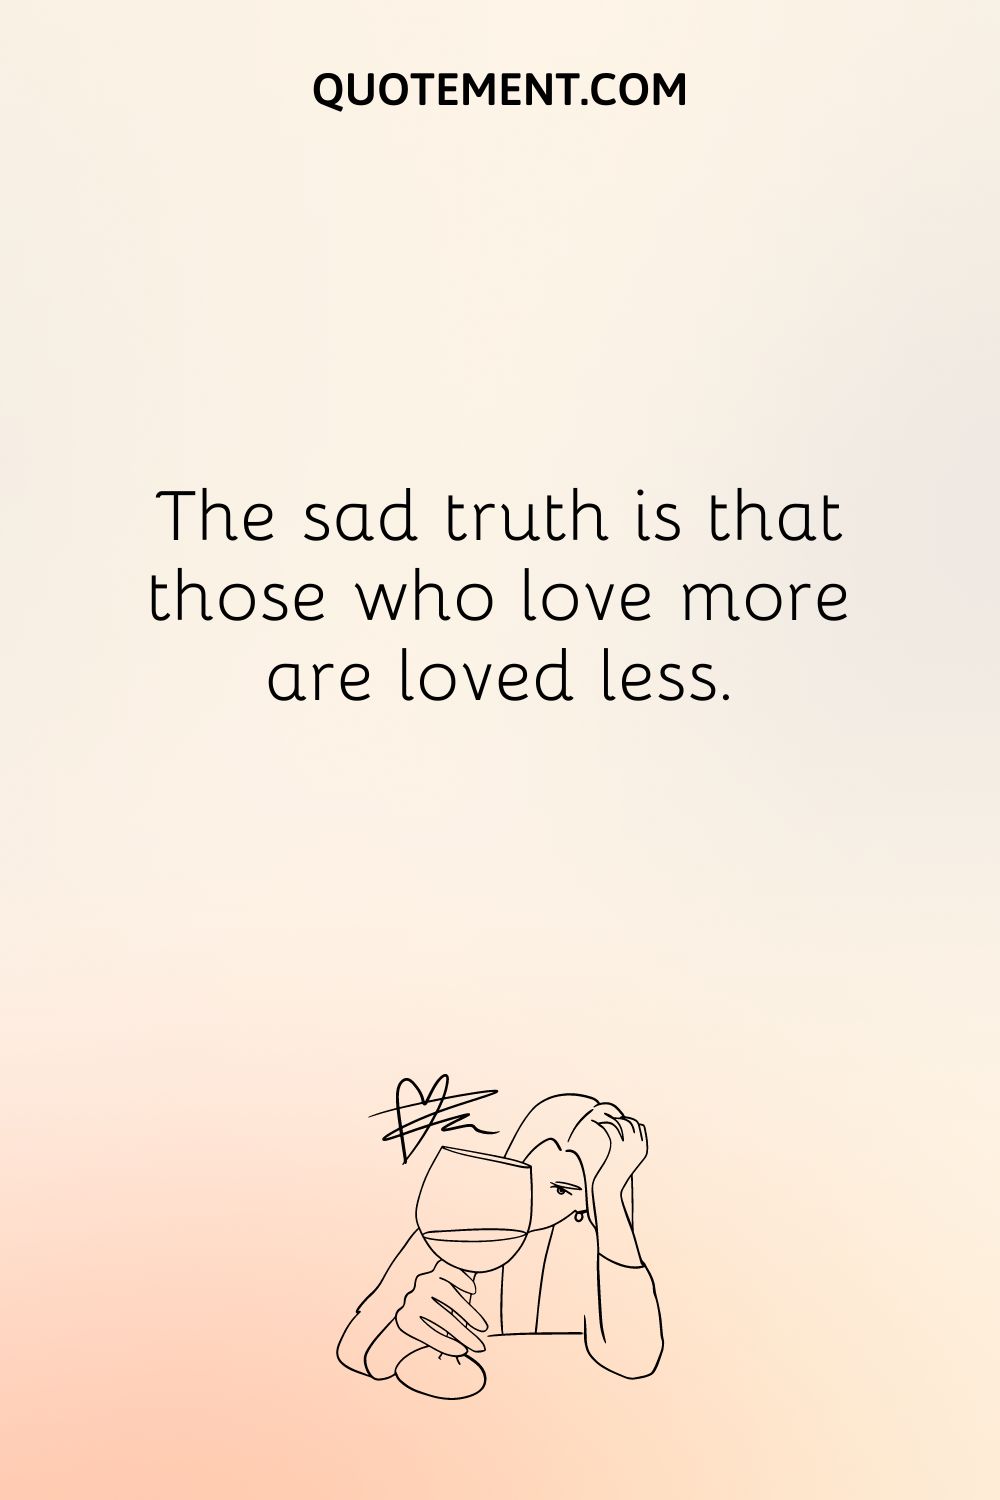  The sad truth is that those who love more are loved less.